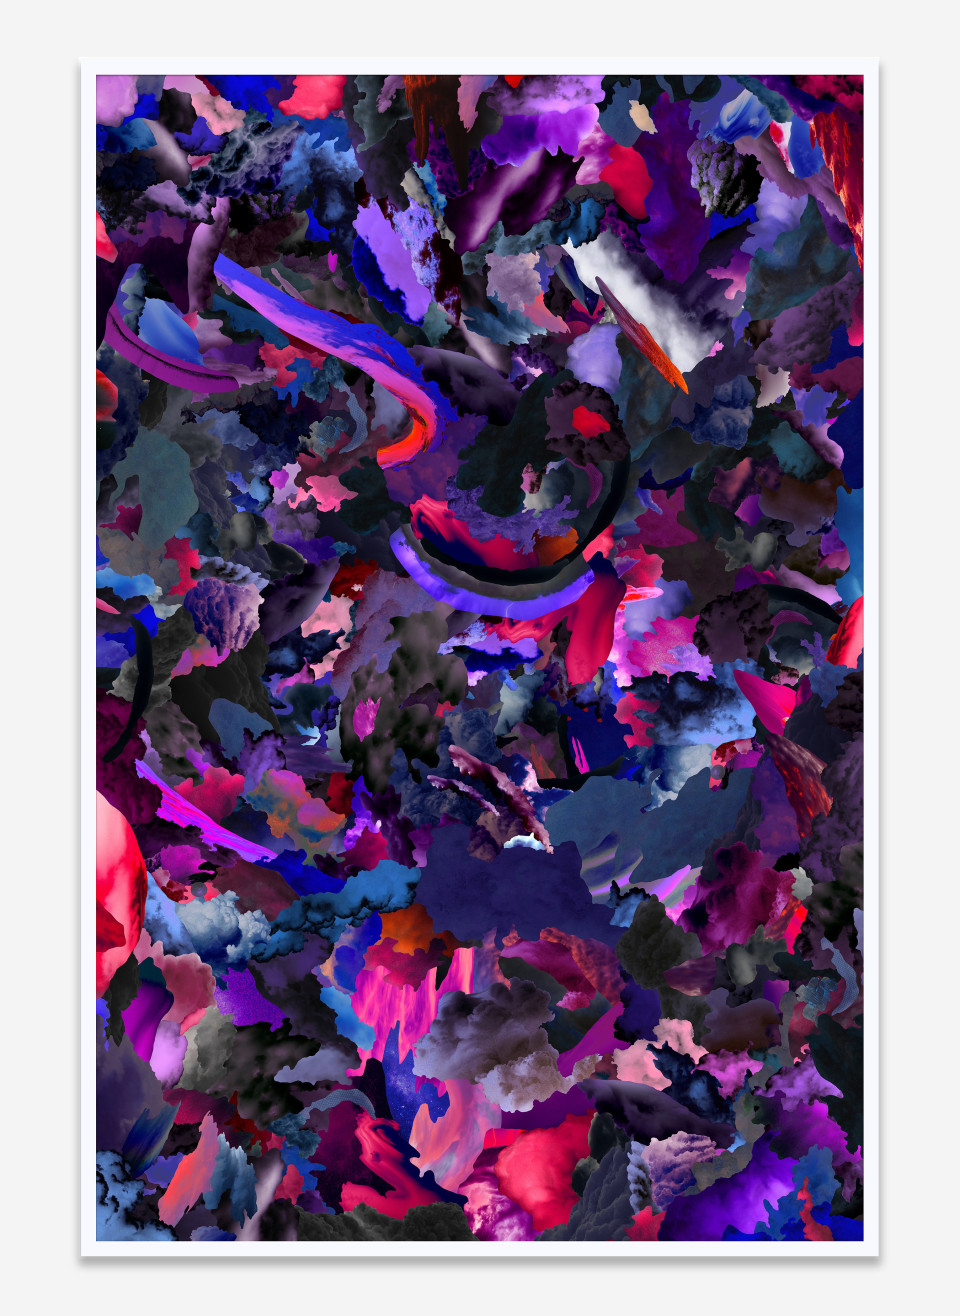 Image: Case Simmons  Clouds Z, 2019  pigment print in artist's frame  60 x 40 inches (152.4 x 101.6 cm)  edition of 1 plus 1 artist's proof